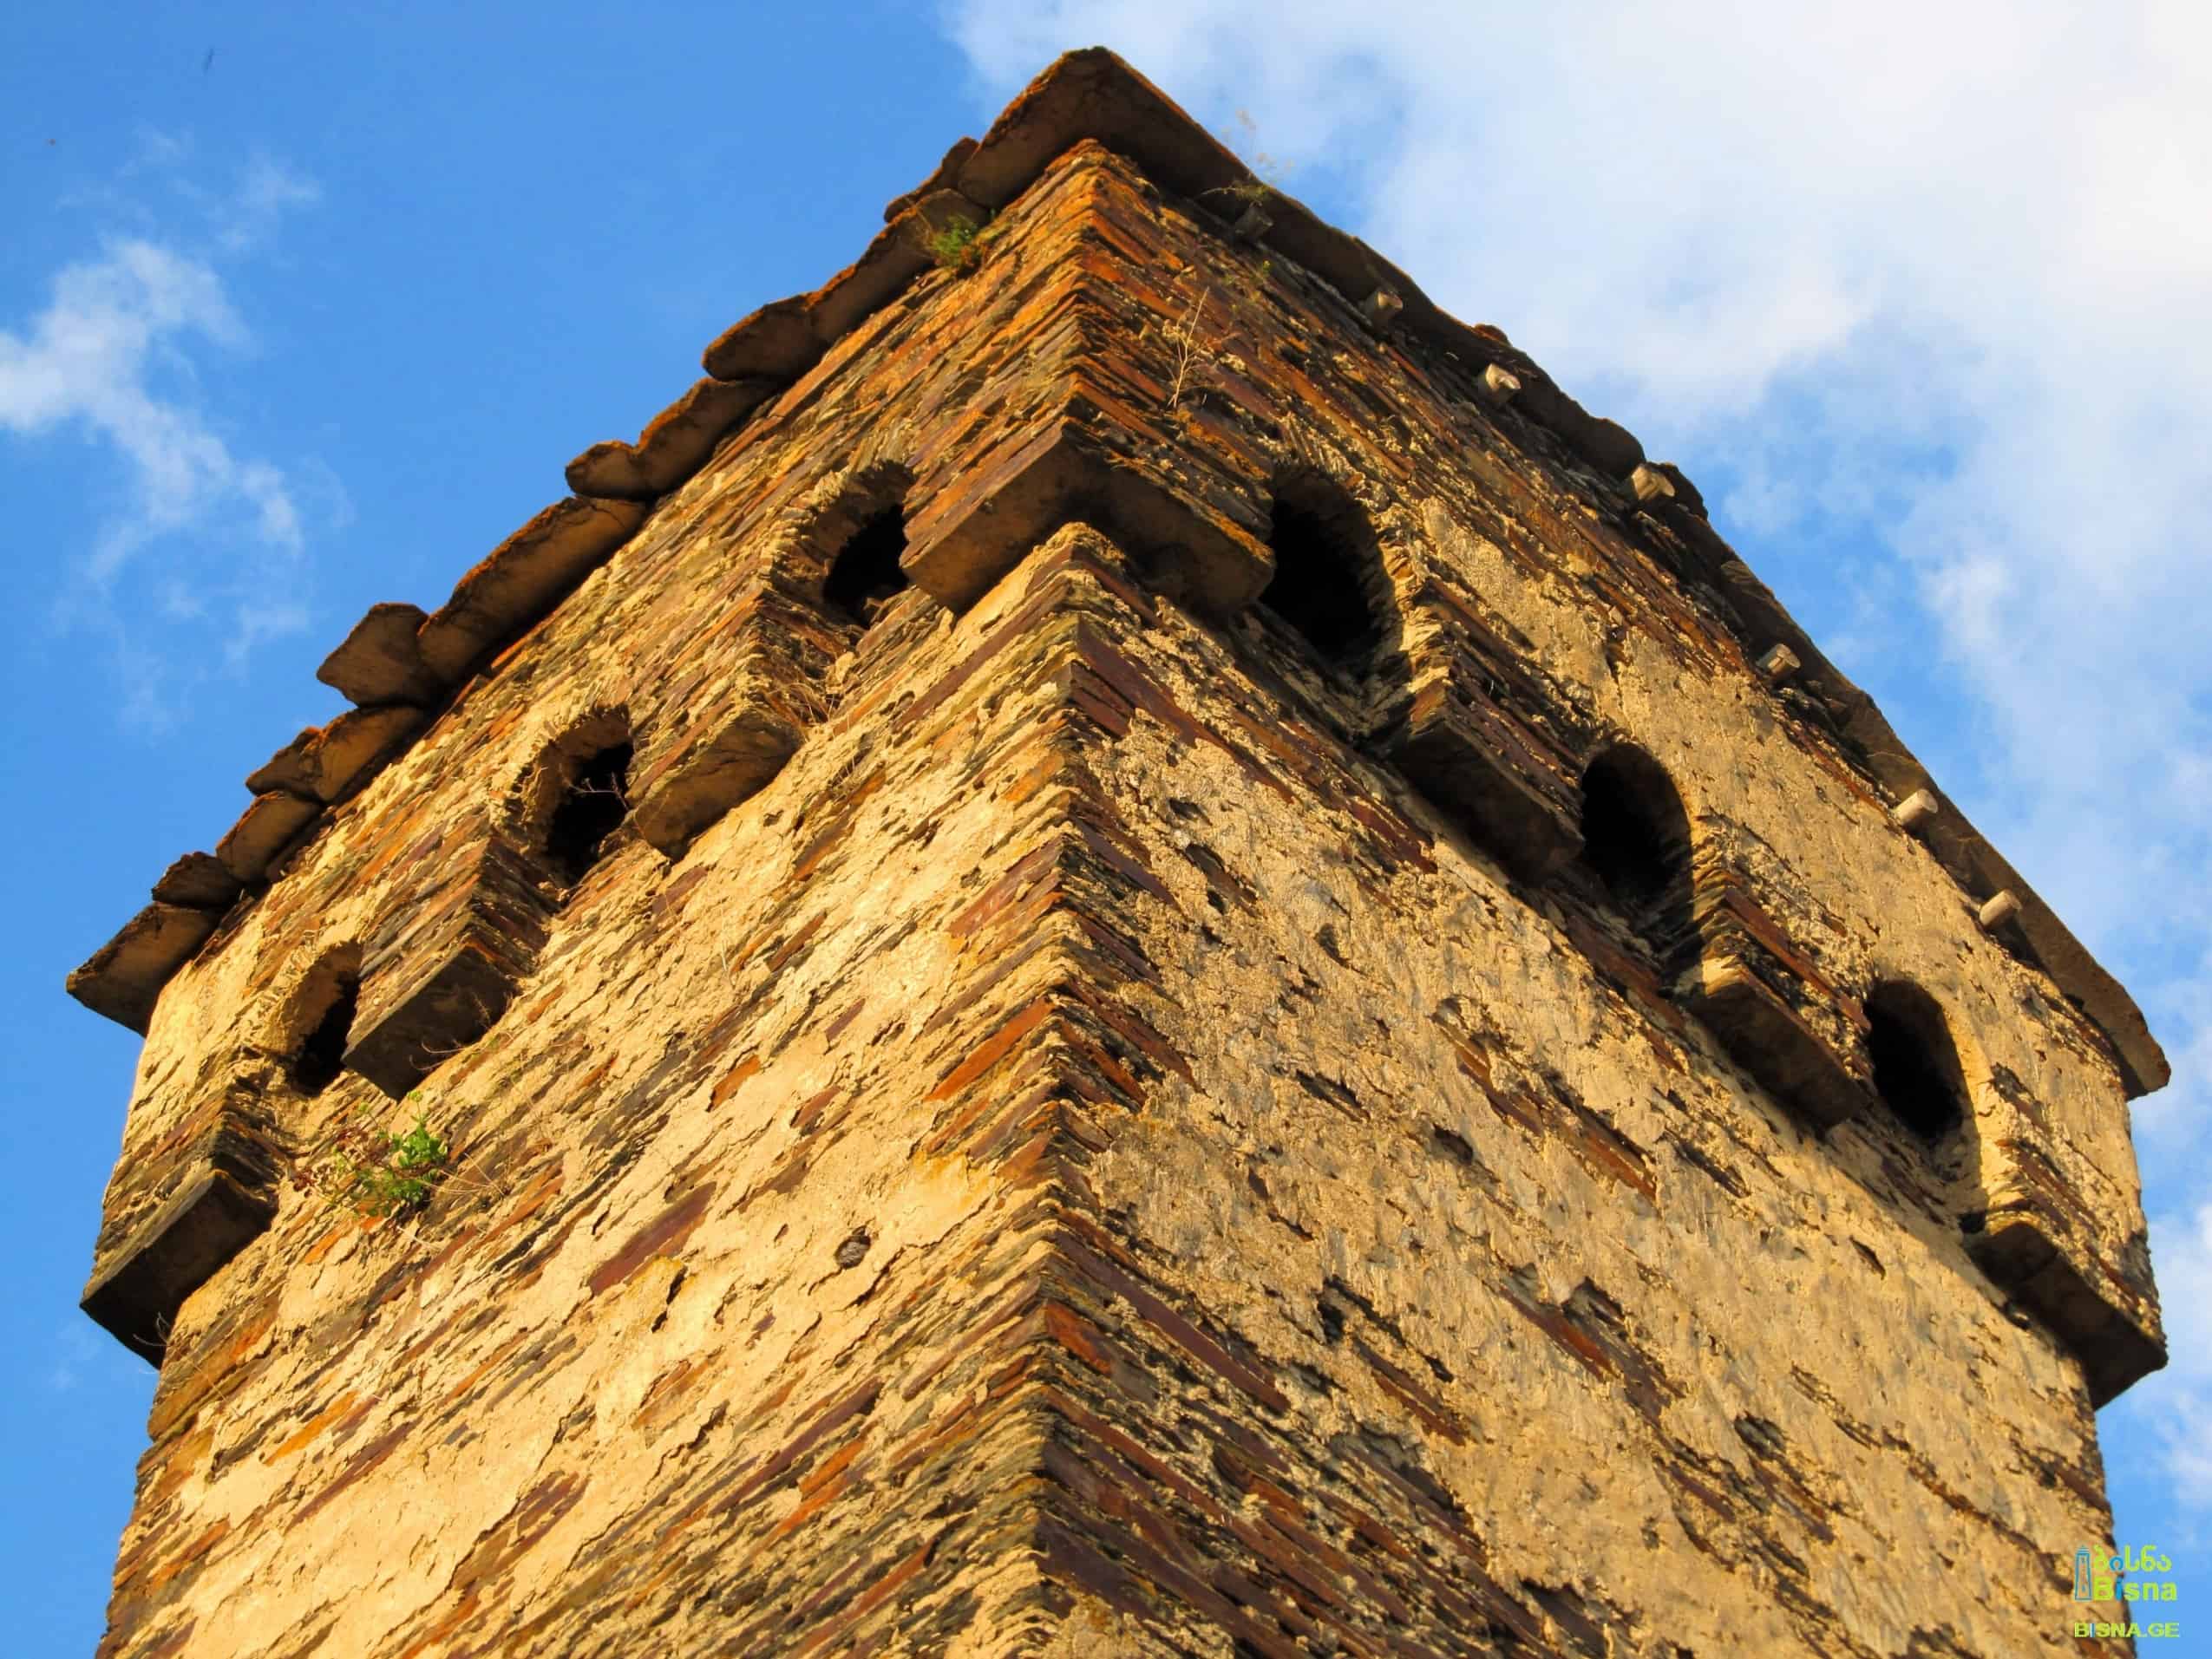 A tower in Ushguli